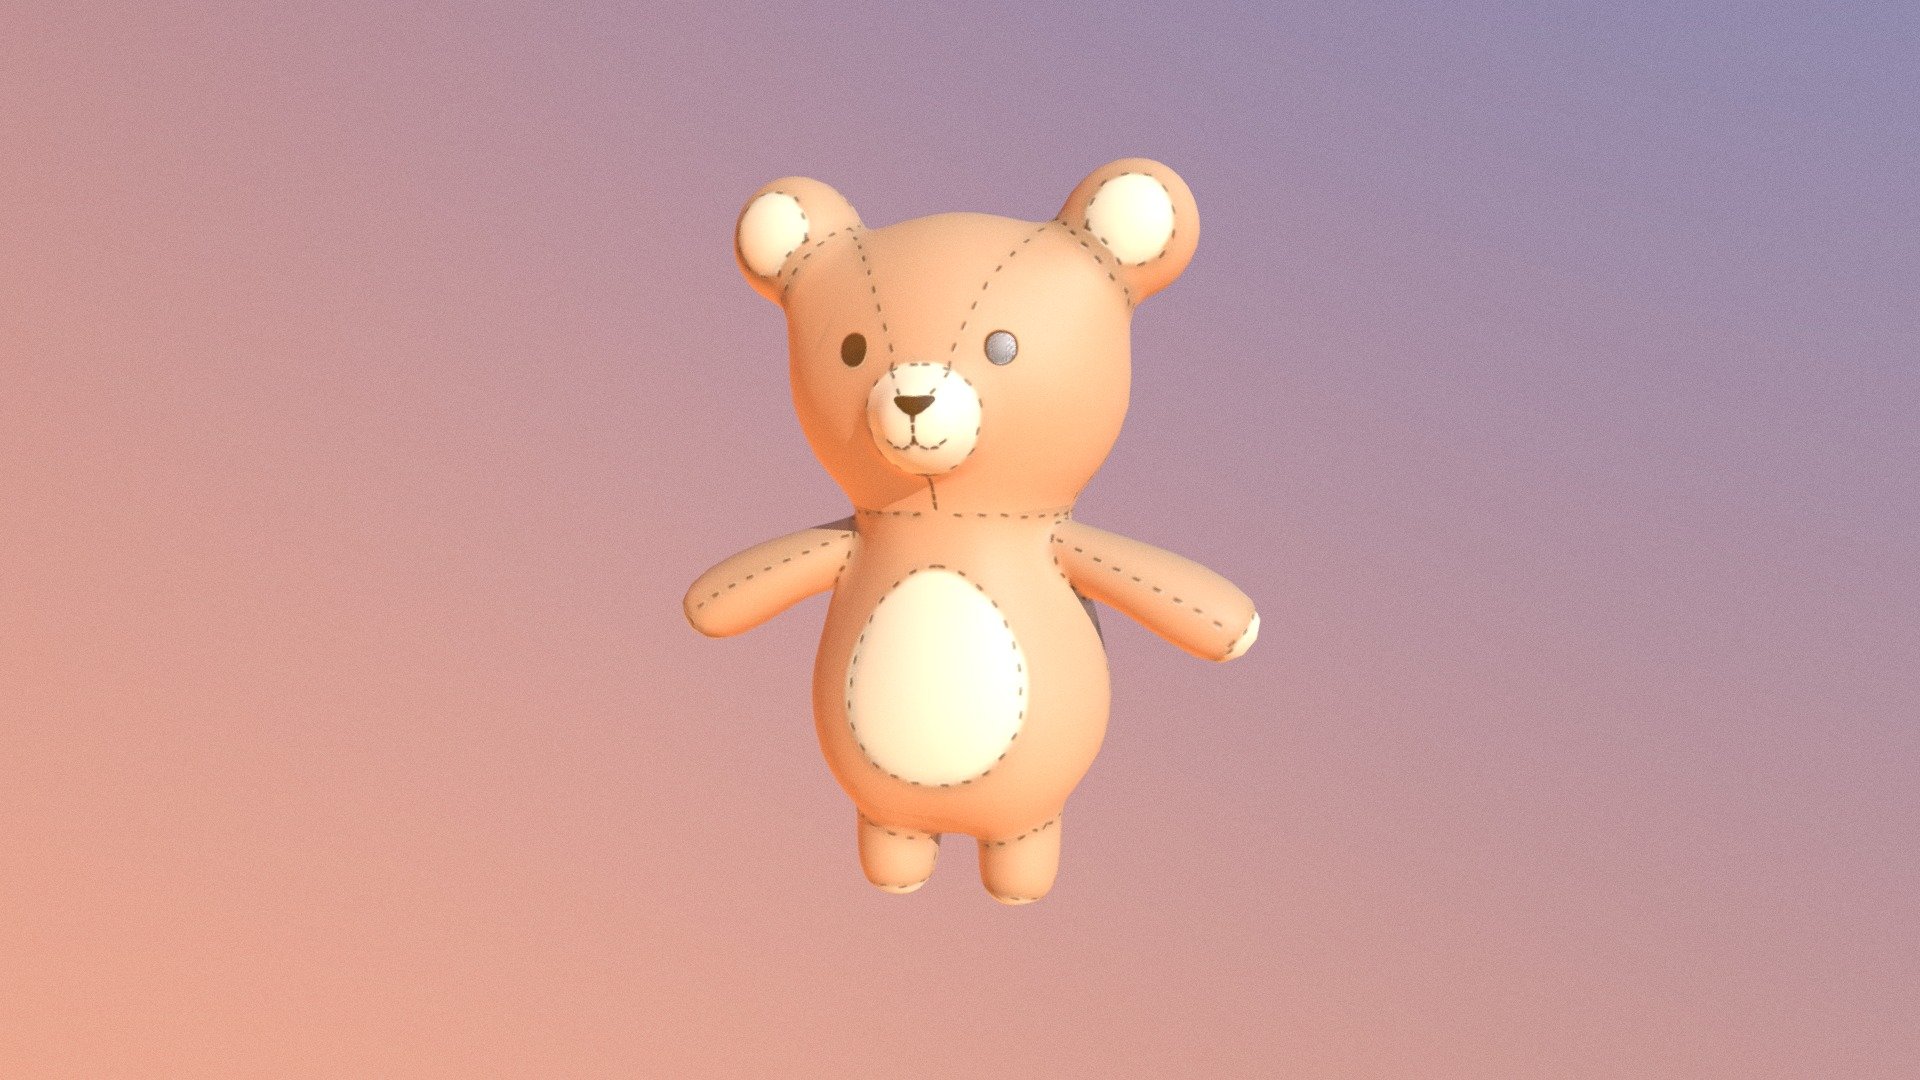 A quick model I made to be a prop for animating 3d model